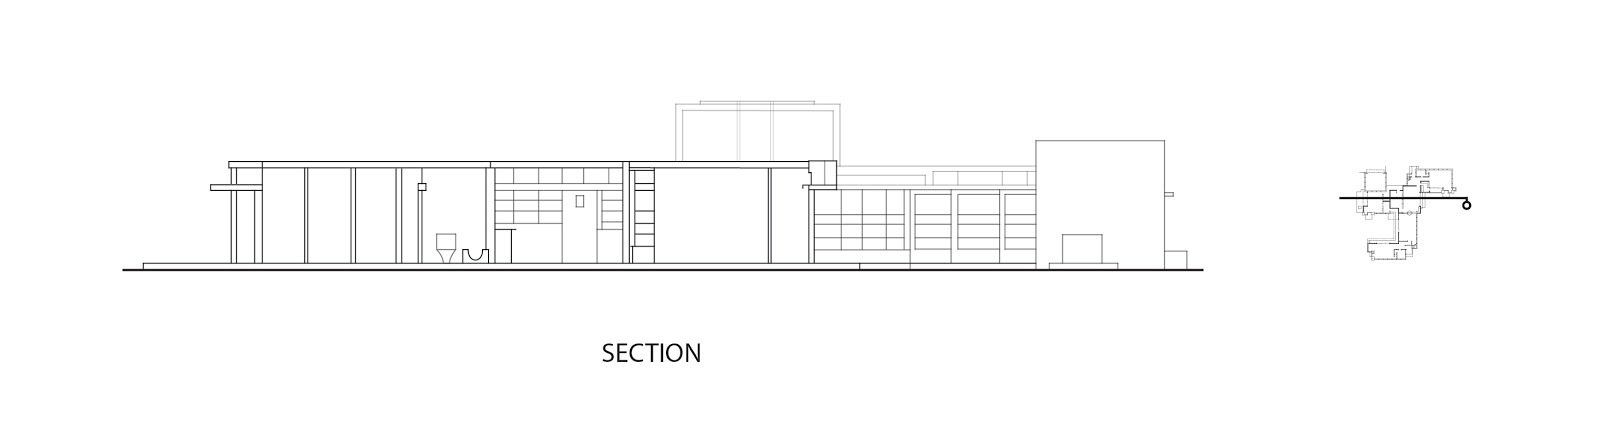 Schindler-Chace House: Schindler House in Plan, Section ...